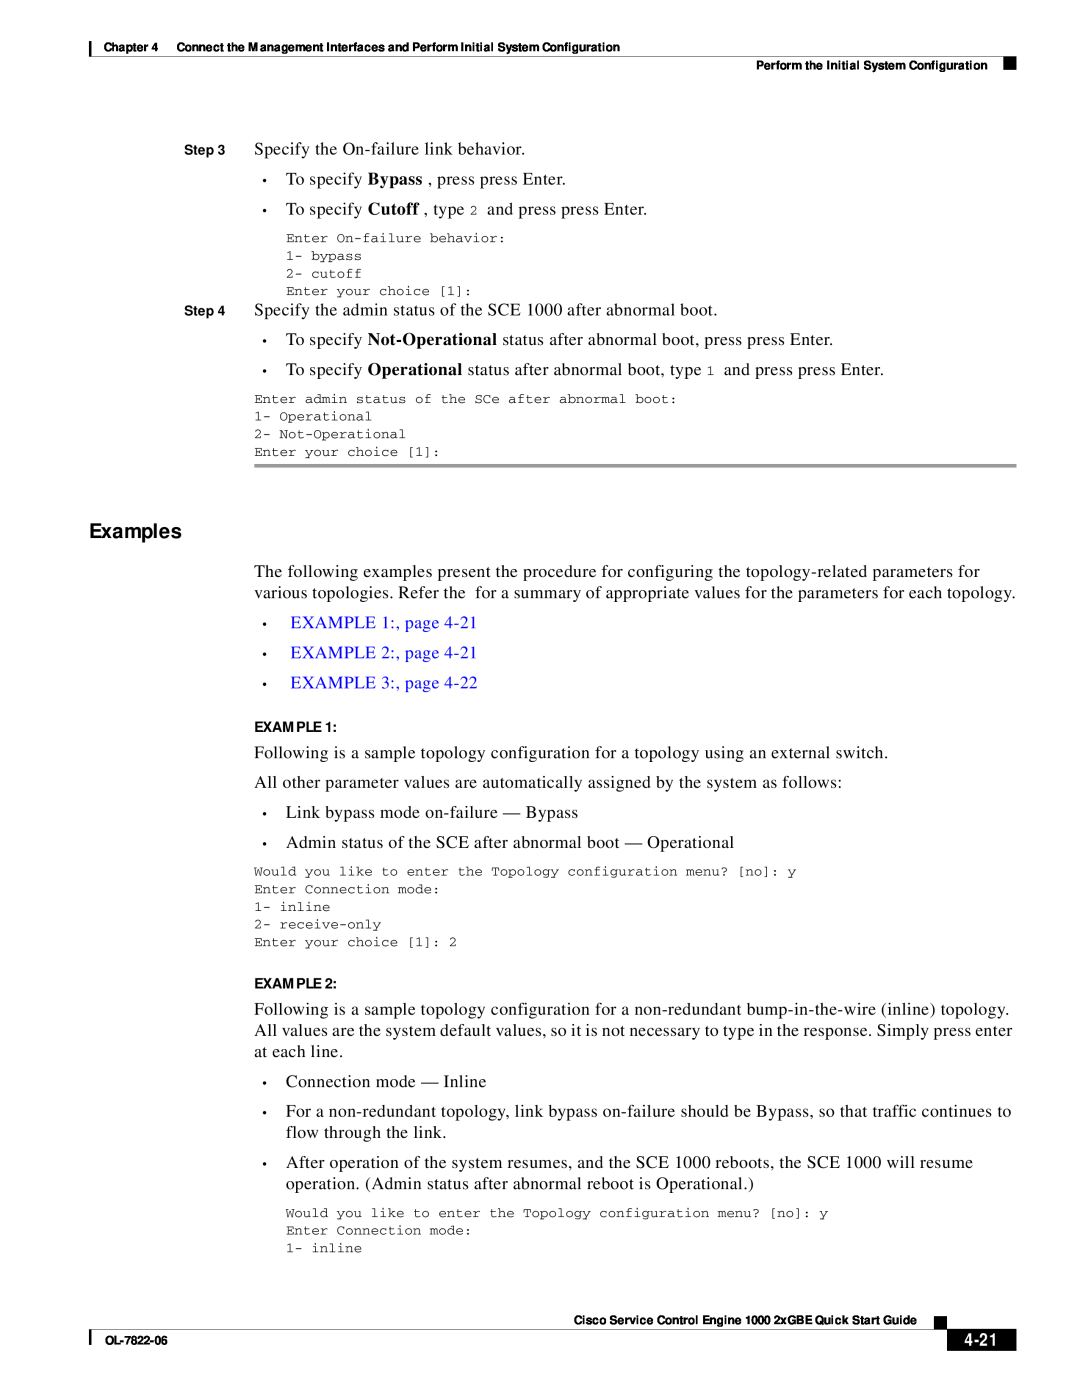 Cisco Systems OL-7822-06 quick start EXAMPLE 1, page EXAMPLE 2, page EXAMPLE 3, page, 4-21, Examples 